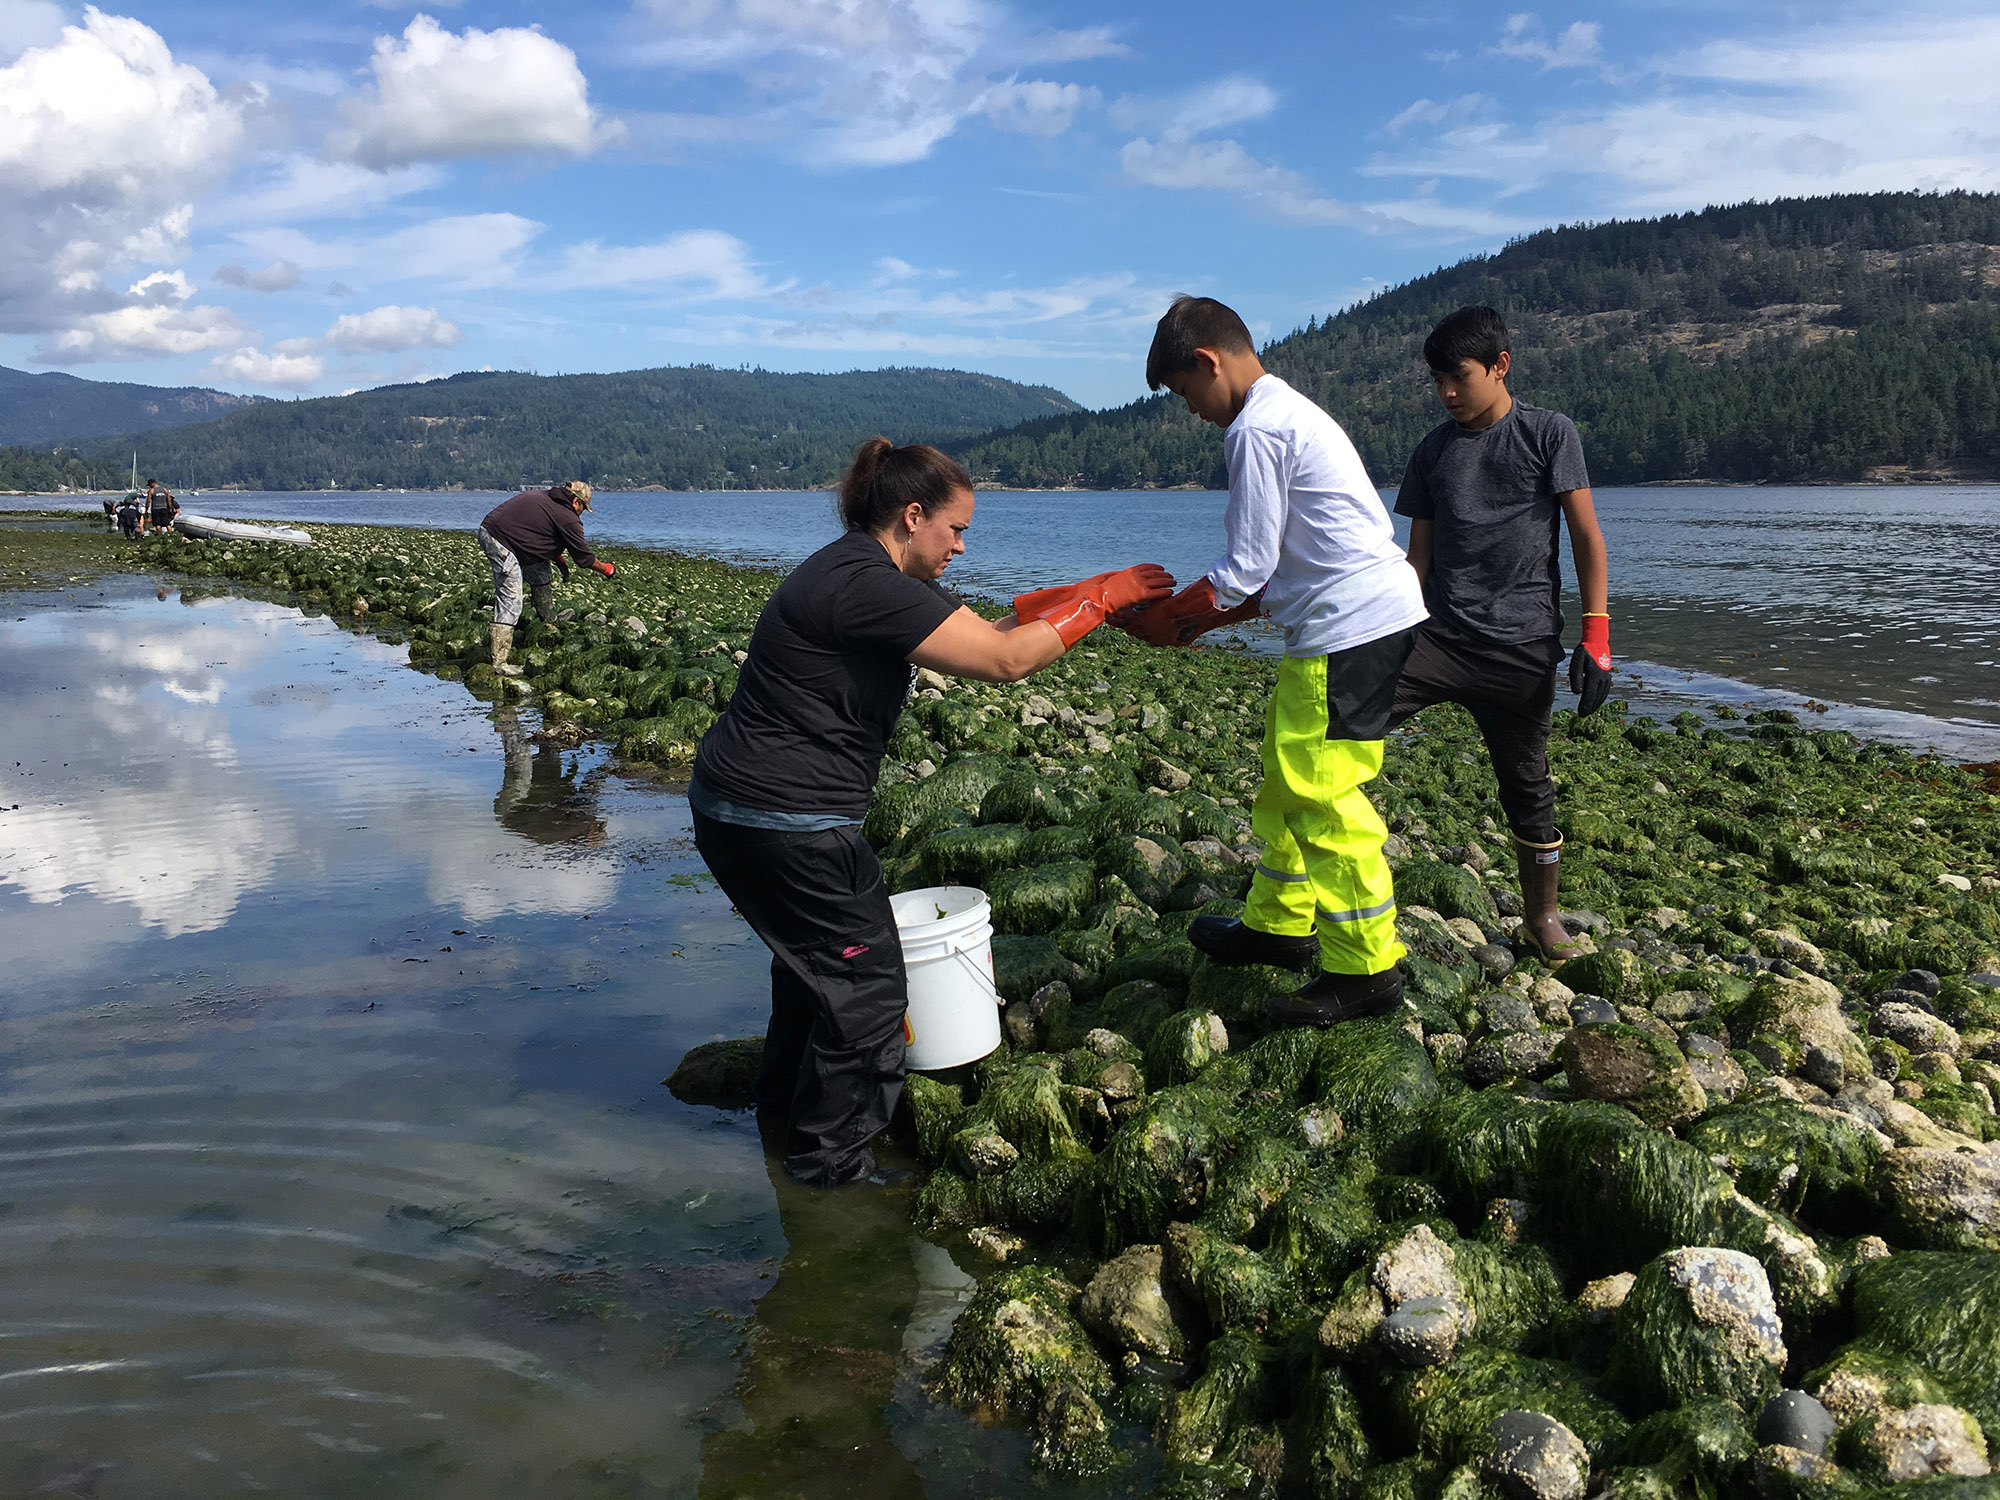 tribal members harvest clams along the water